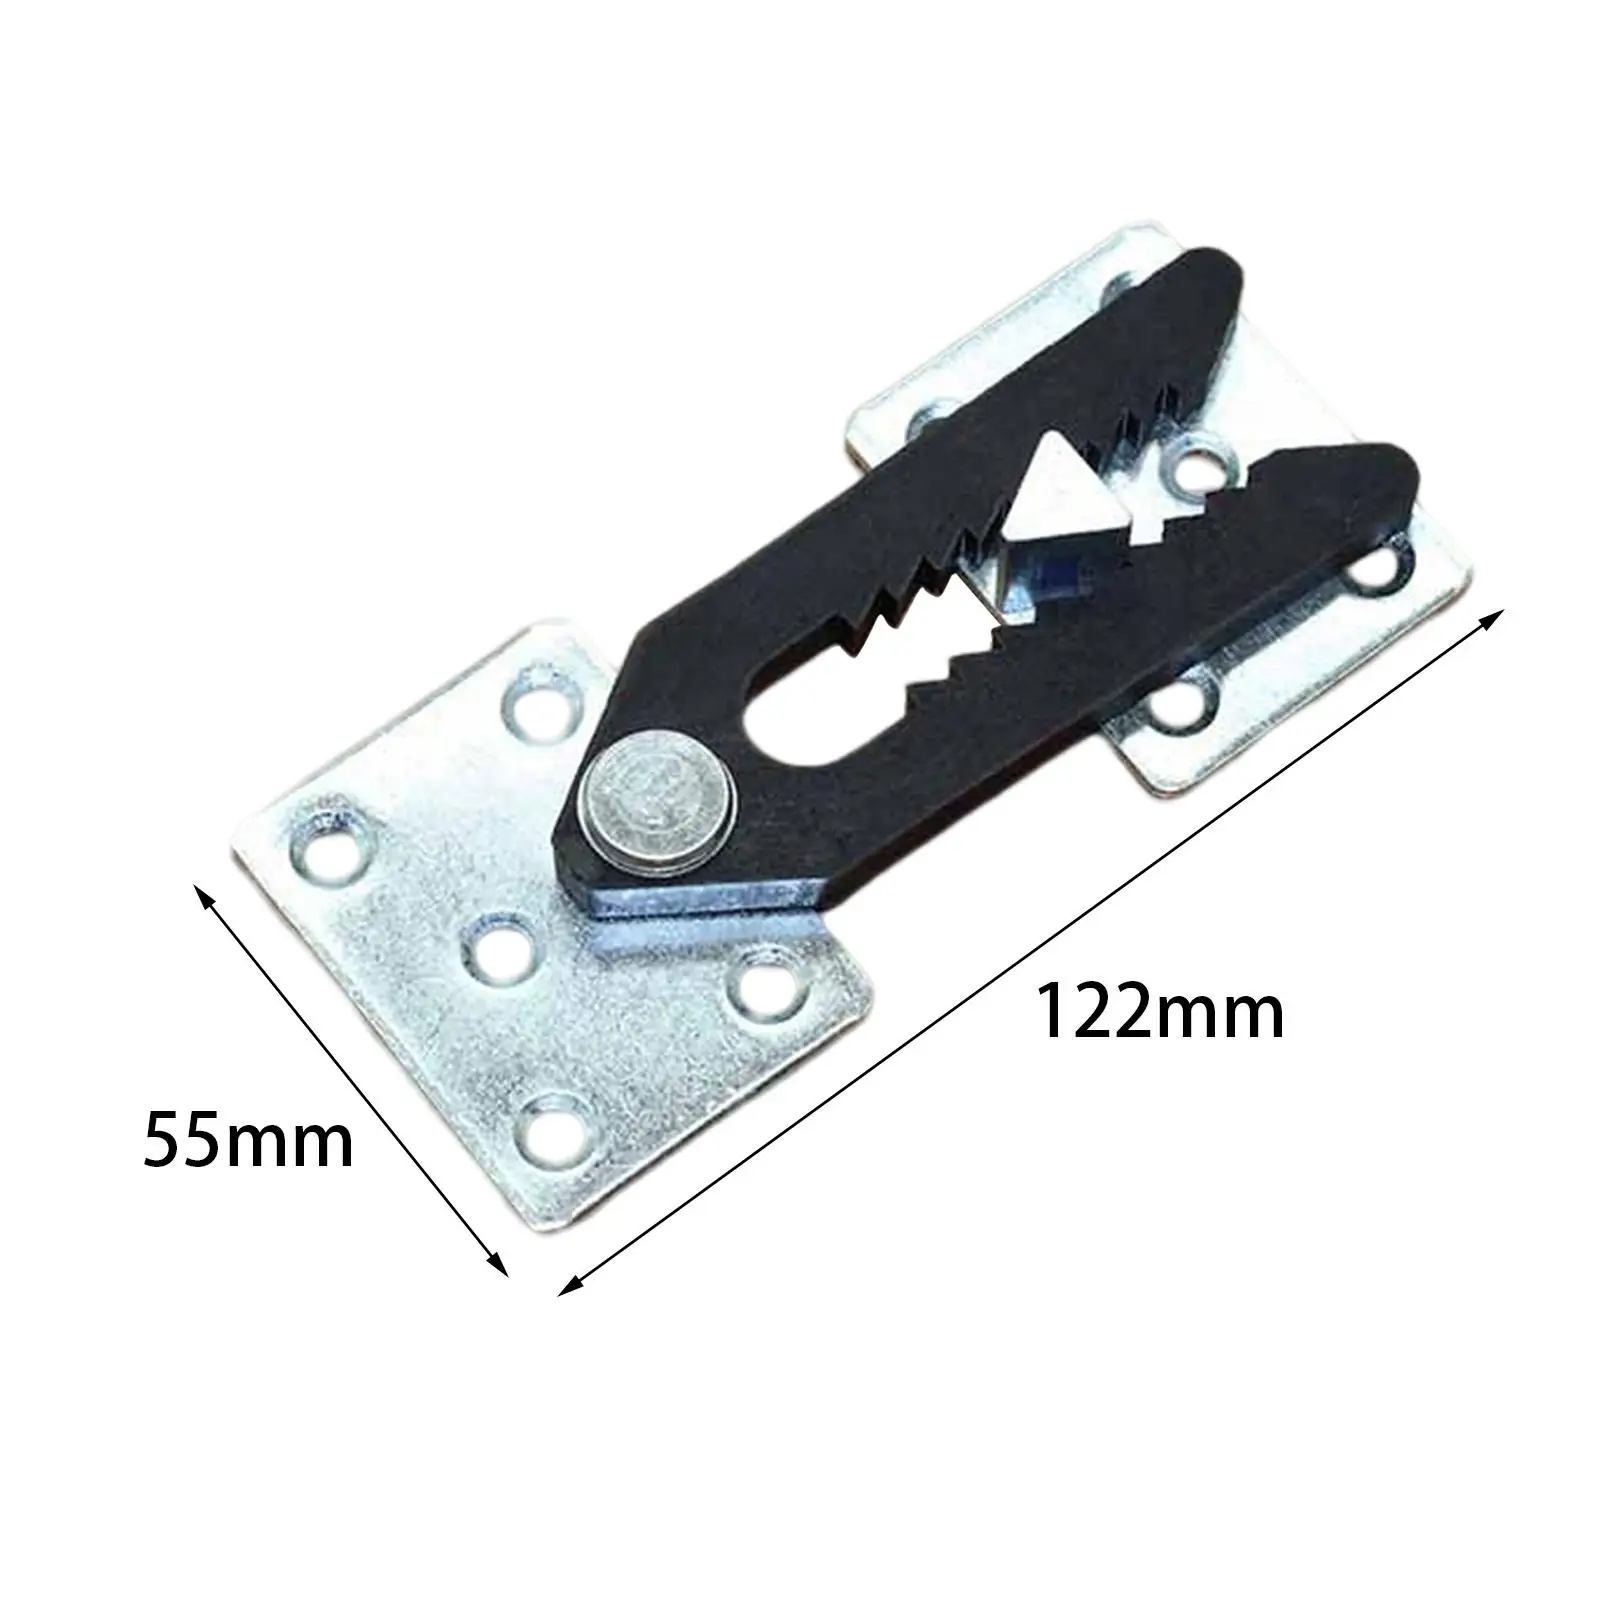 Sofa Connectors Equipment Simple Using Sturdy Removable Practical Universal Useful Furniture Connector Sectional Lock for Office